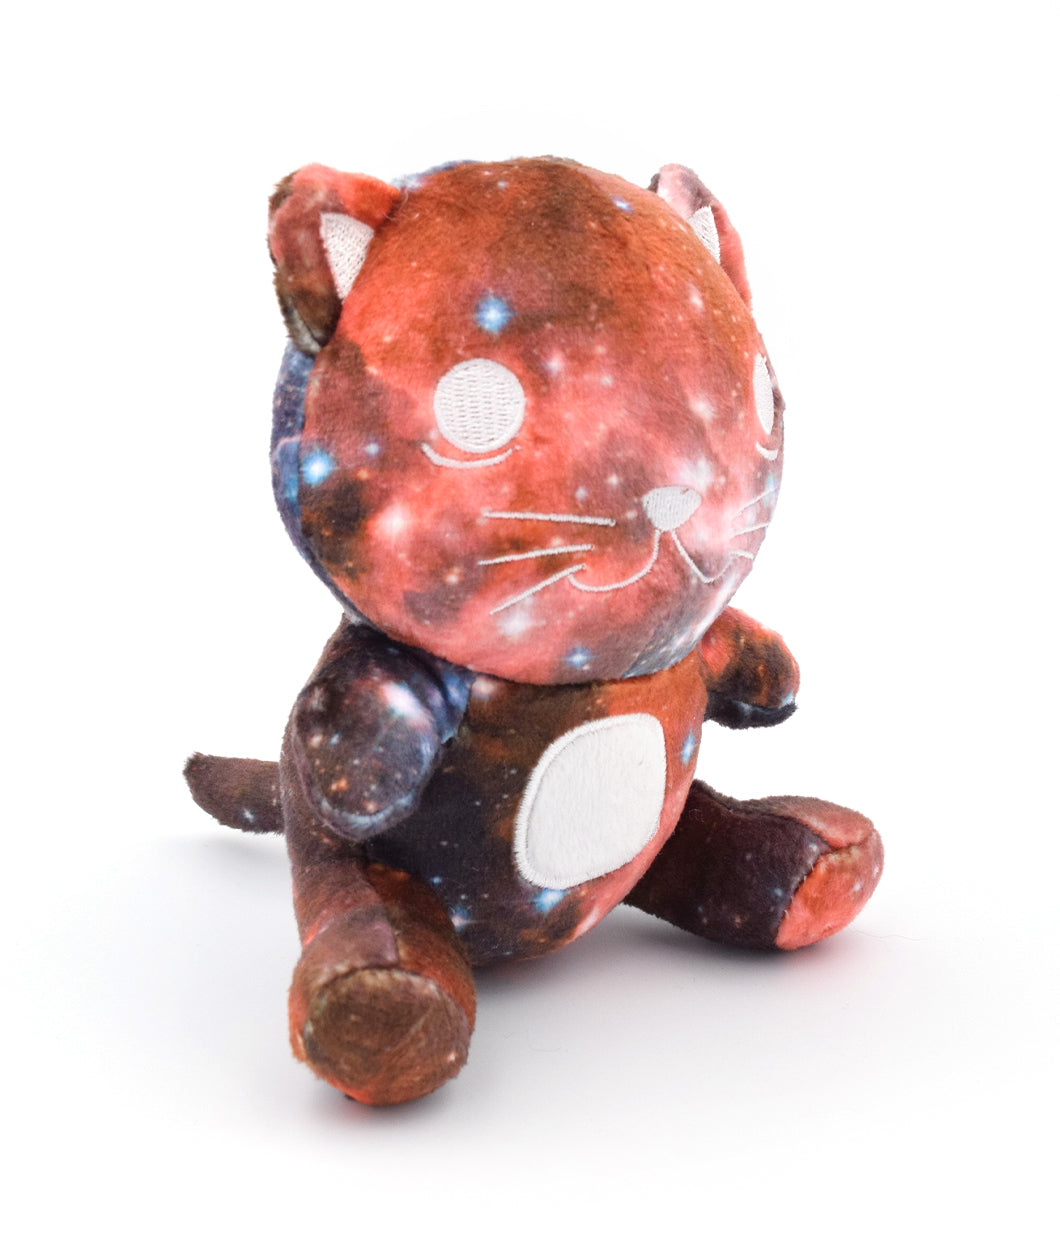 The living galactic Schrodinger's Cat that has galaxy plush fabric and a white embroidered face that is smiling because it is alive. 5.5" tall in sitting position.